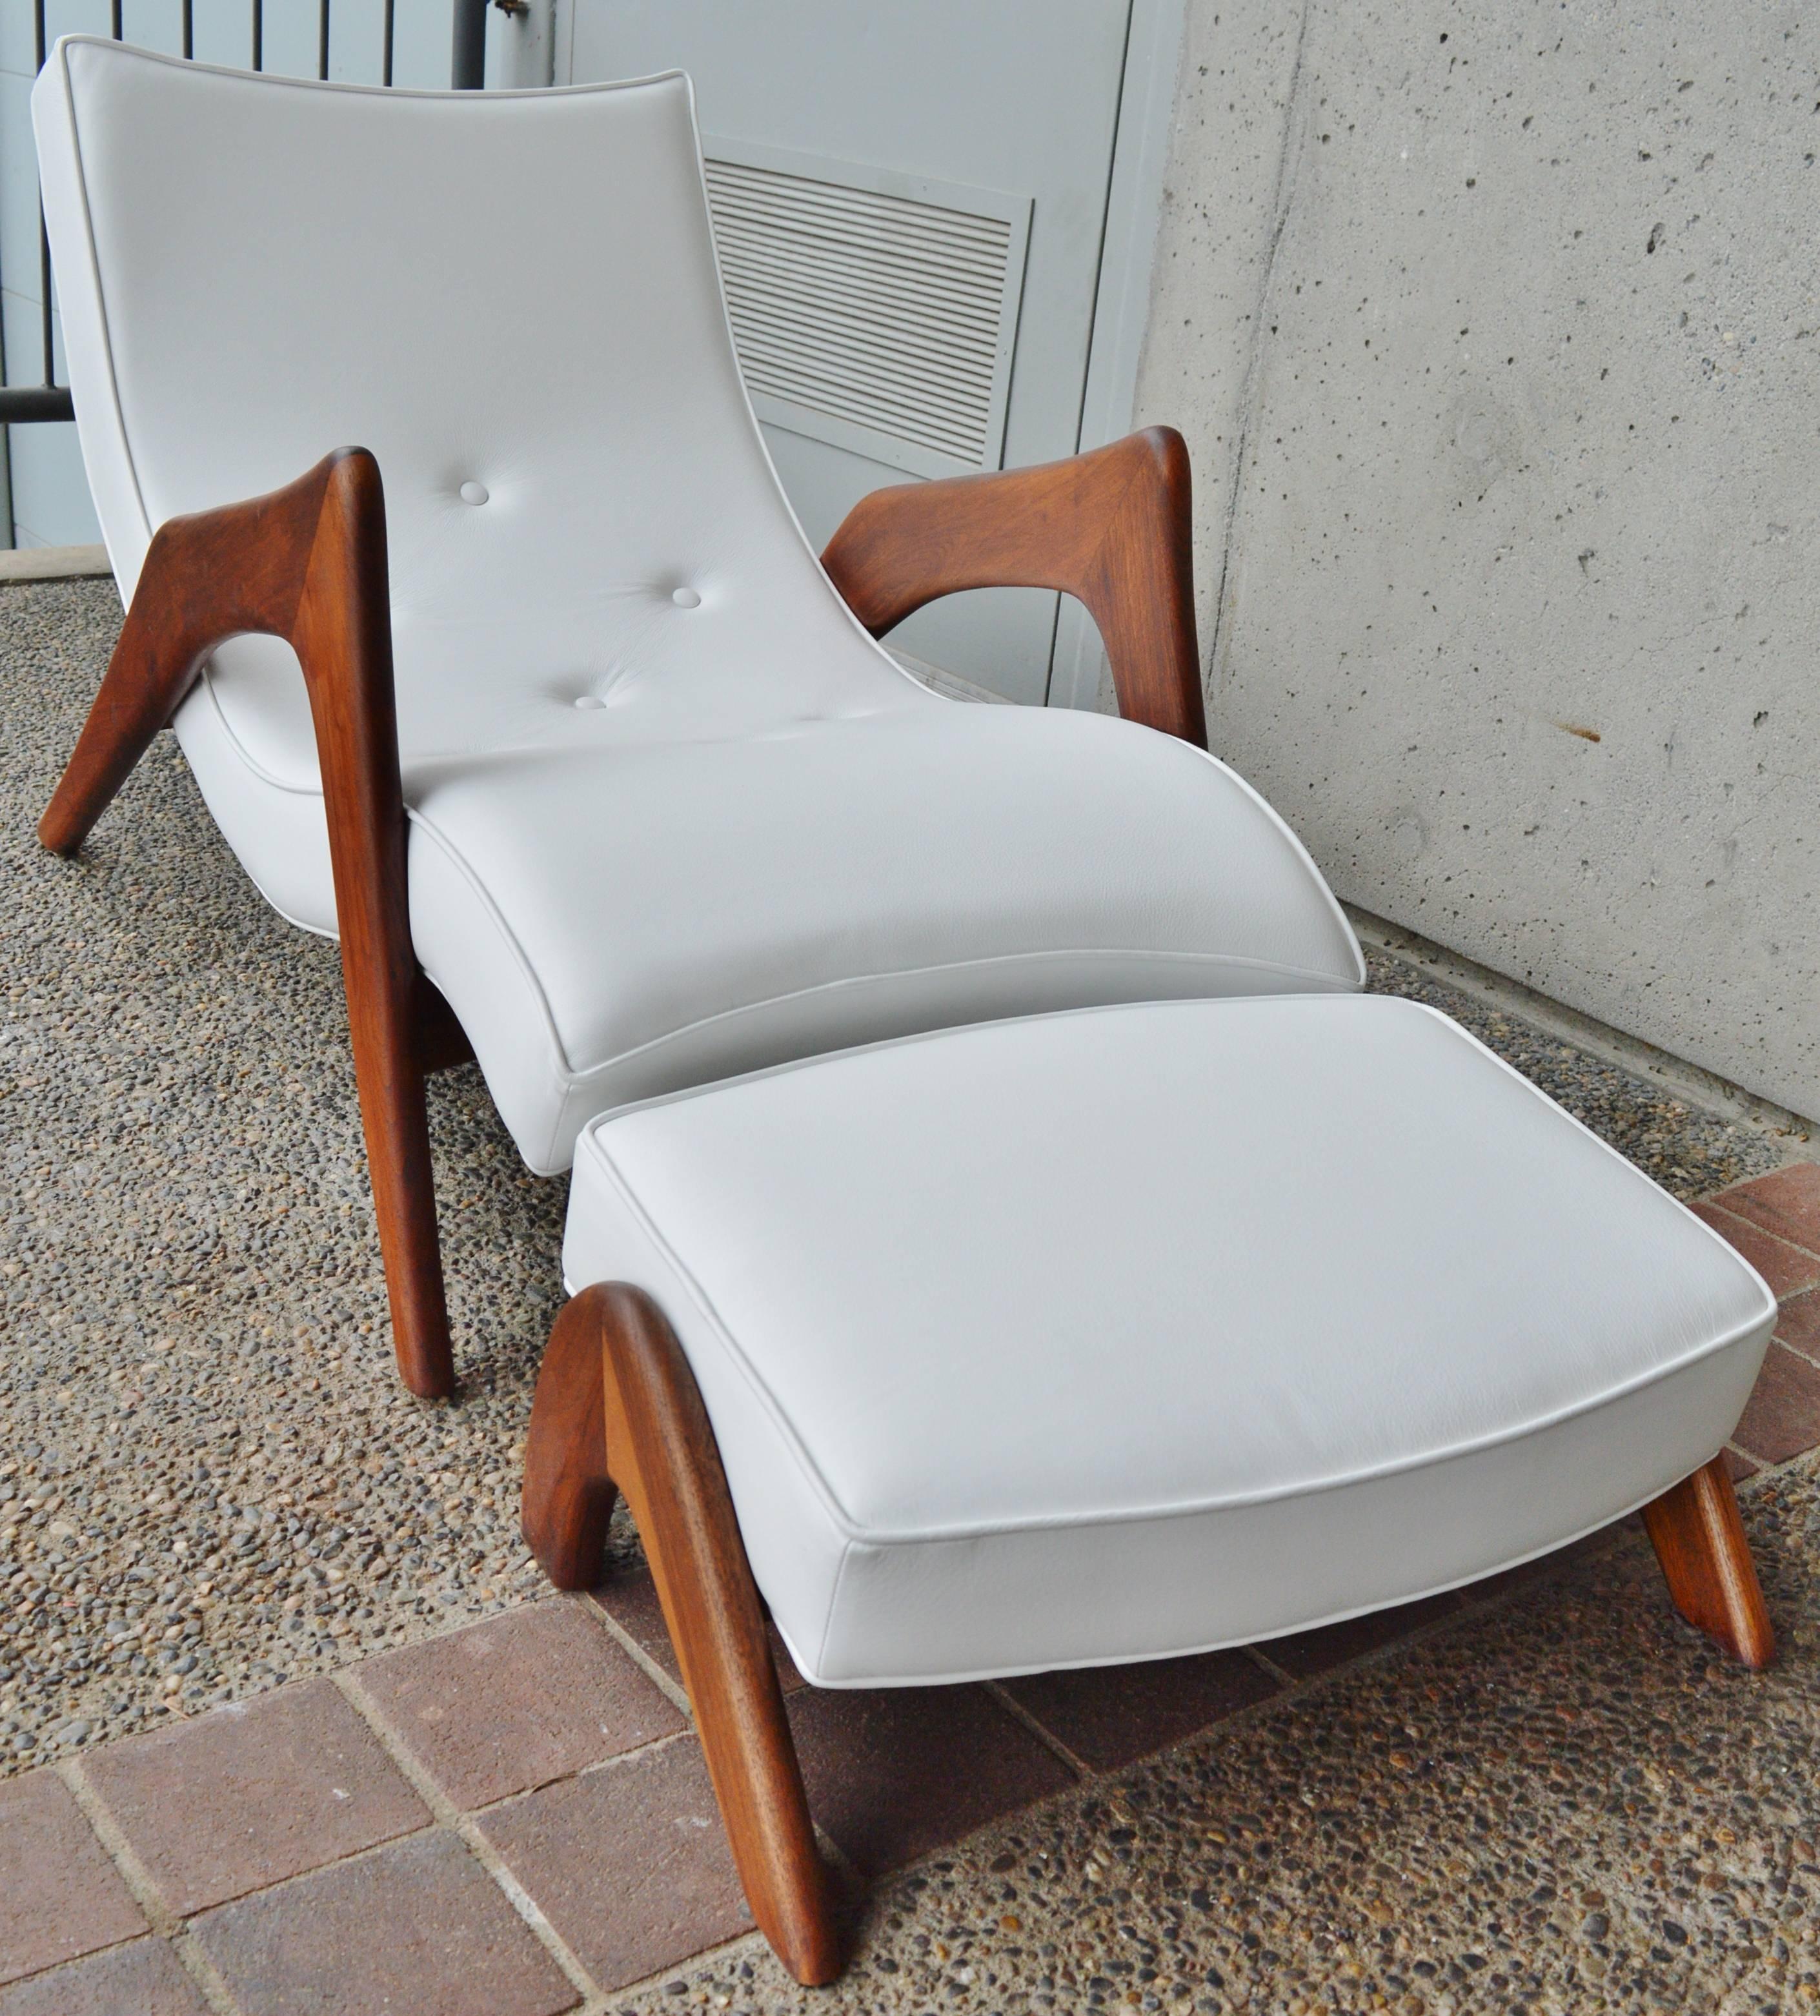 American Rare Grasshopper Chaise and Ottoman, White Leather by Adrian Pearsall